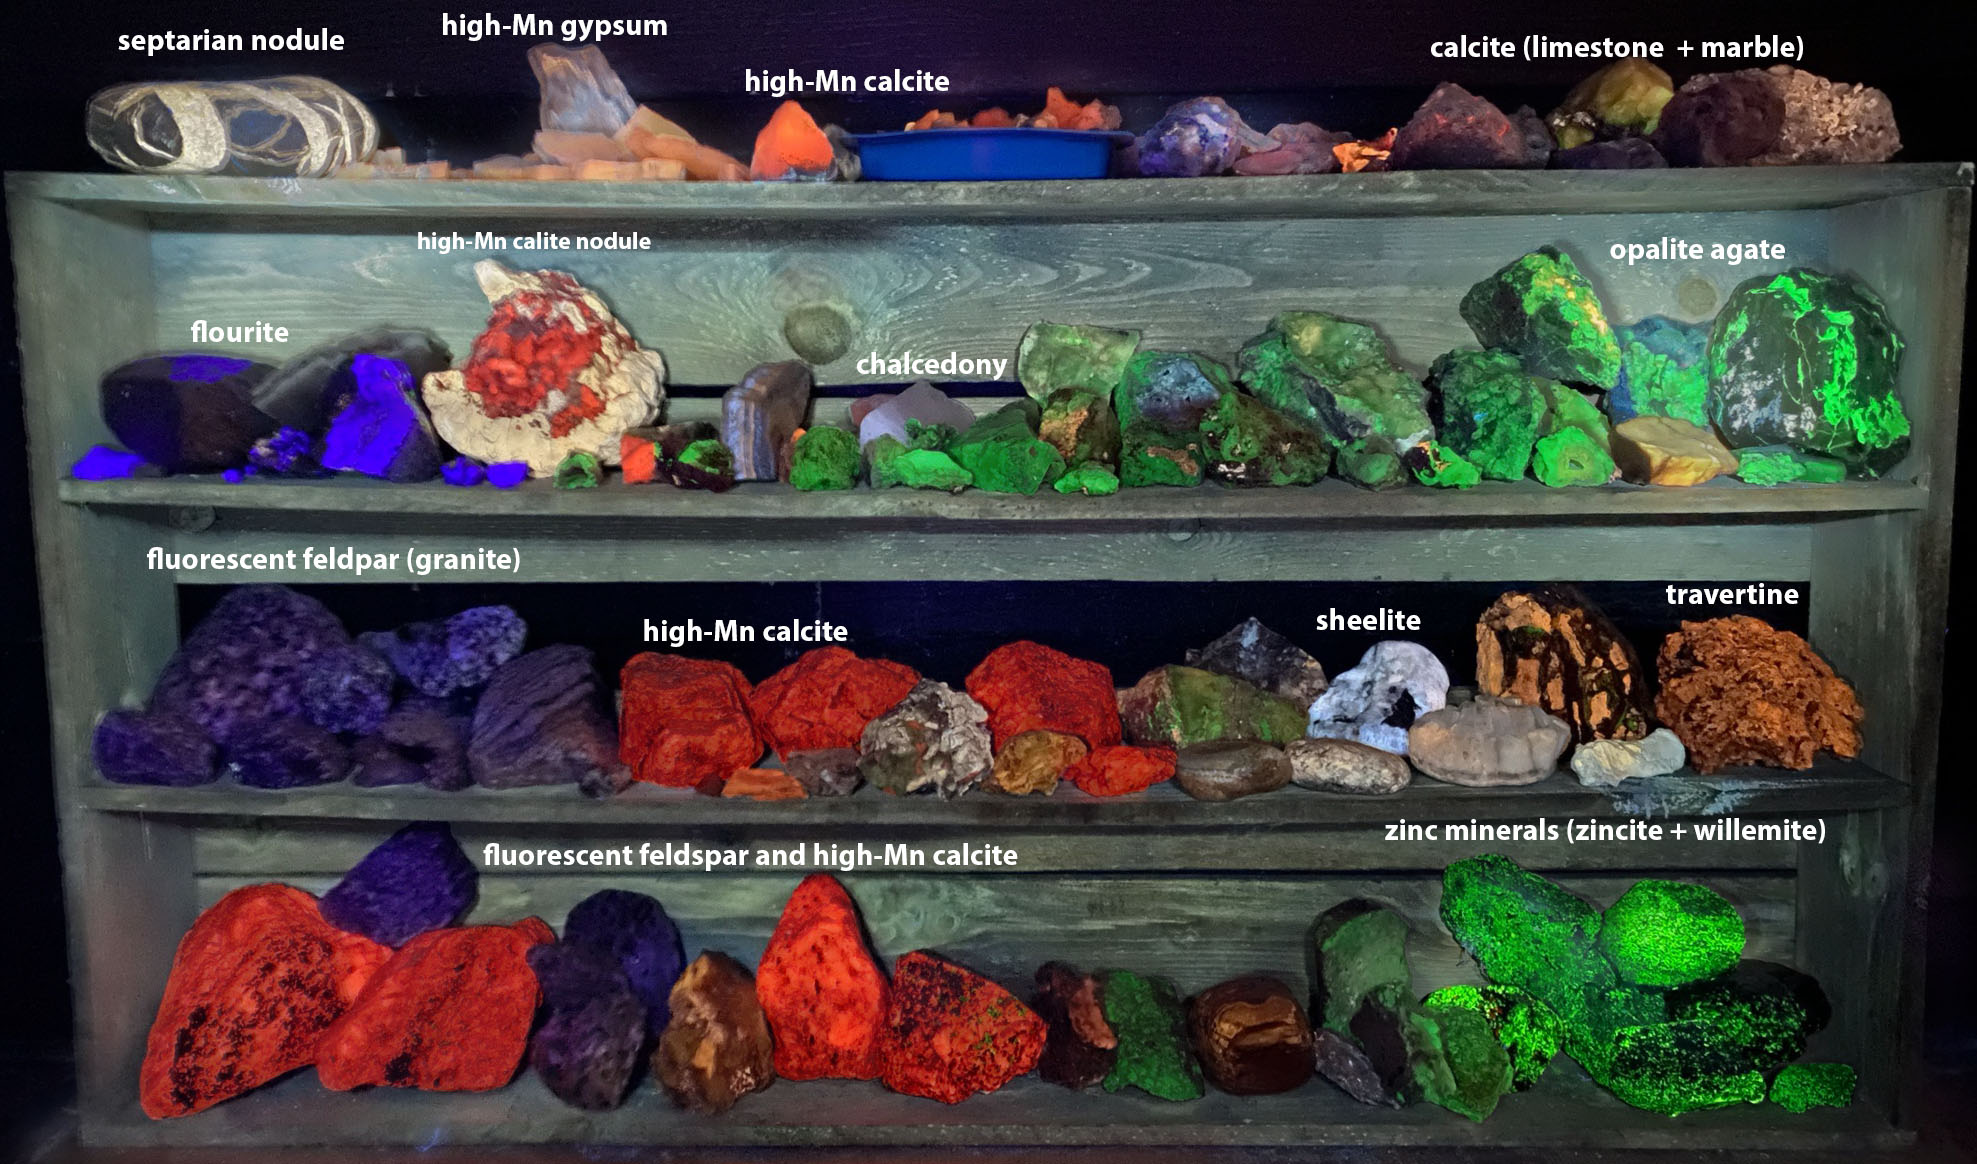 4 shelves of rock and  minerals samples under ultraviolet lighting with name labels of selected samples shown.